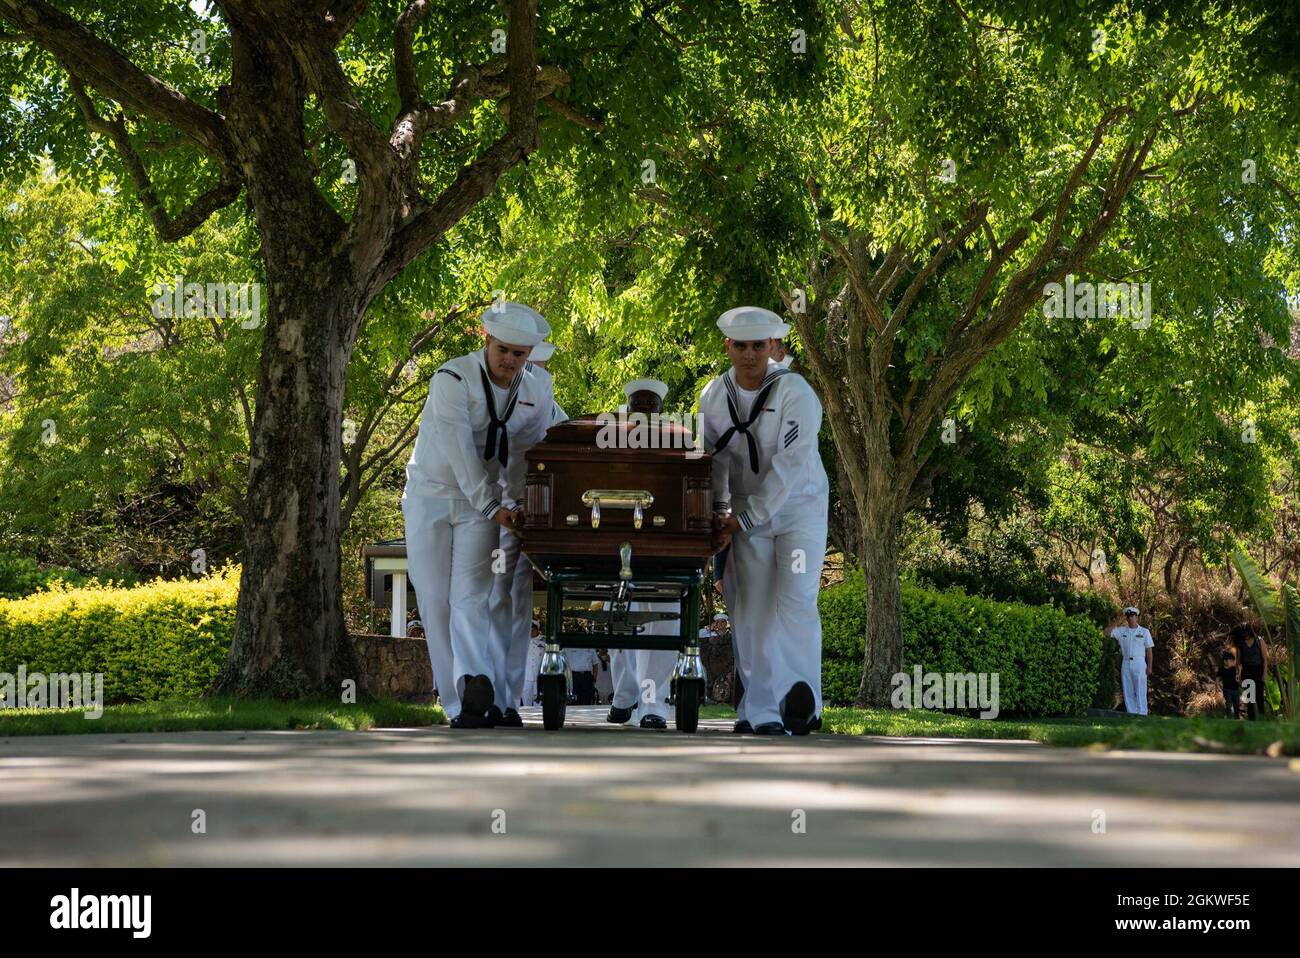 Sailors assigned to U.S. Navy Region Hawaii escort the casket of U.S. Navy Musician 2nd Class Charlton Hanna Ferguson, 19, of Kosciusko, Missouri during a funeral held at the National Memorial Cemetery of the Pacific, Honolulu, Hawaii, July 9, 2021. Ferguson was assigned to the USS Oklahoma when it sustained fire from Japanese aircraft and multiple torpedo hits. The result of the attack capsized the battleship causing the deaths of 429 crew members on Dec. 7, 1941, at Ford Island, Pearl Harbor. Ferguson was identified Dec. 17, 2020 through DNA analysis by the Defense POW/MIA Accounting Agency Stock Photo